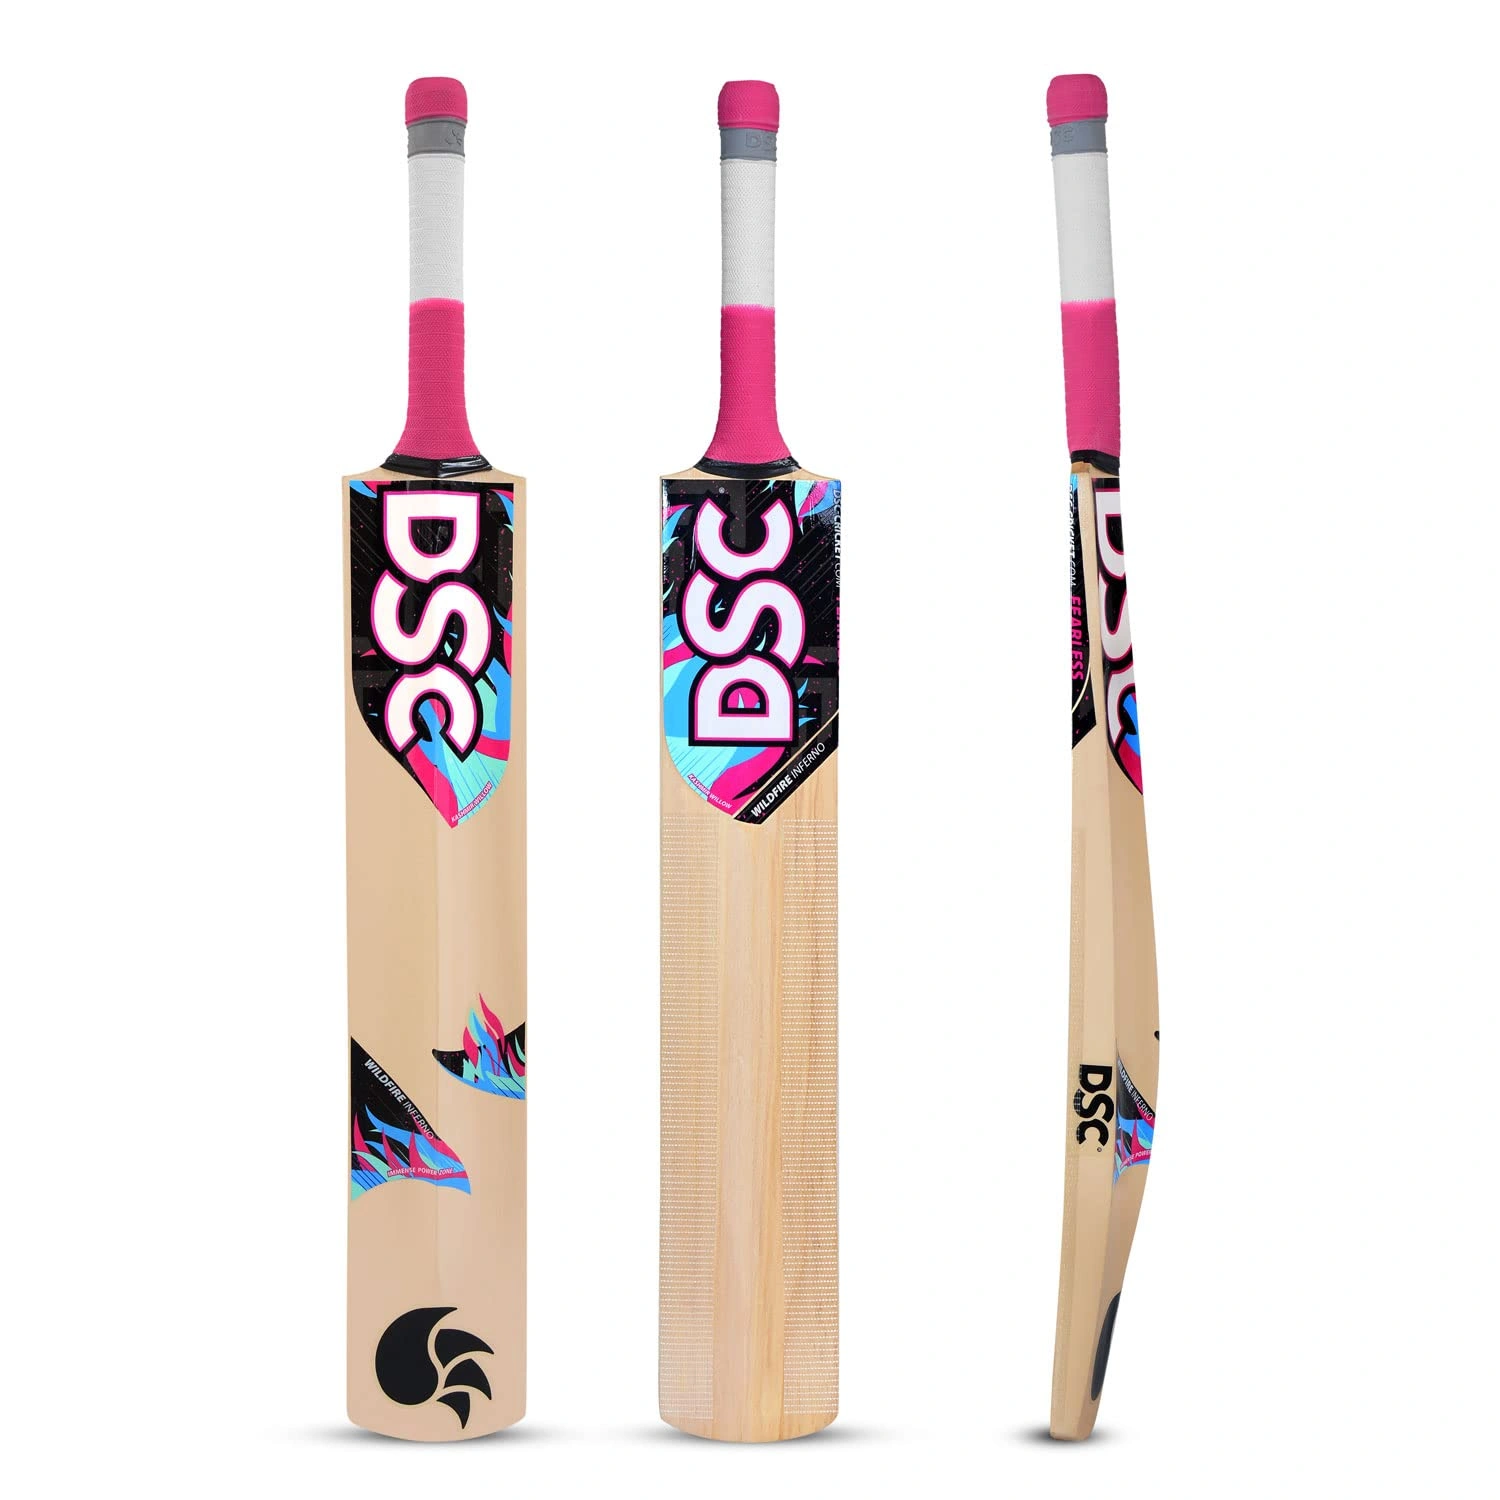 DSC WildFire Inferno Kashmir Willow Cricket Bat for Tennis Ball Cricket: Lightweight and Powerful for Dynamic Play-FS-4